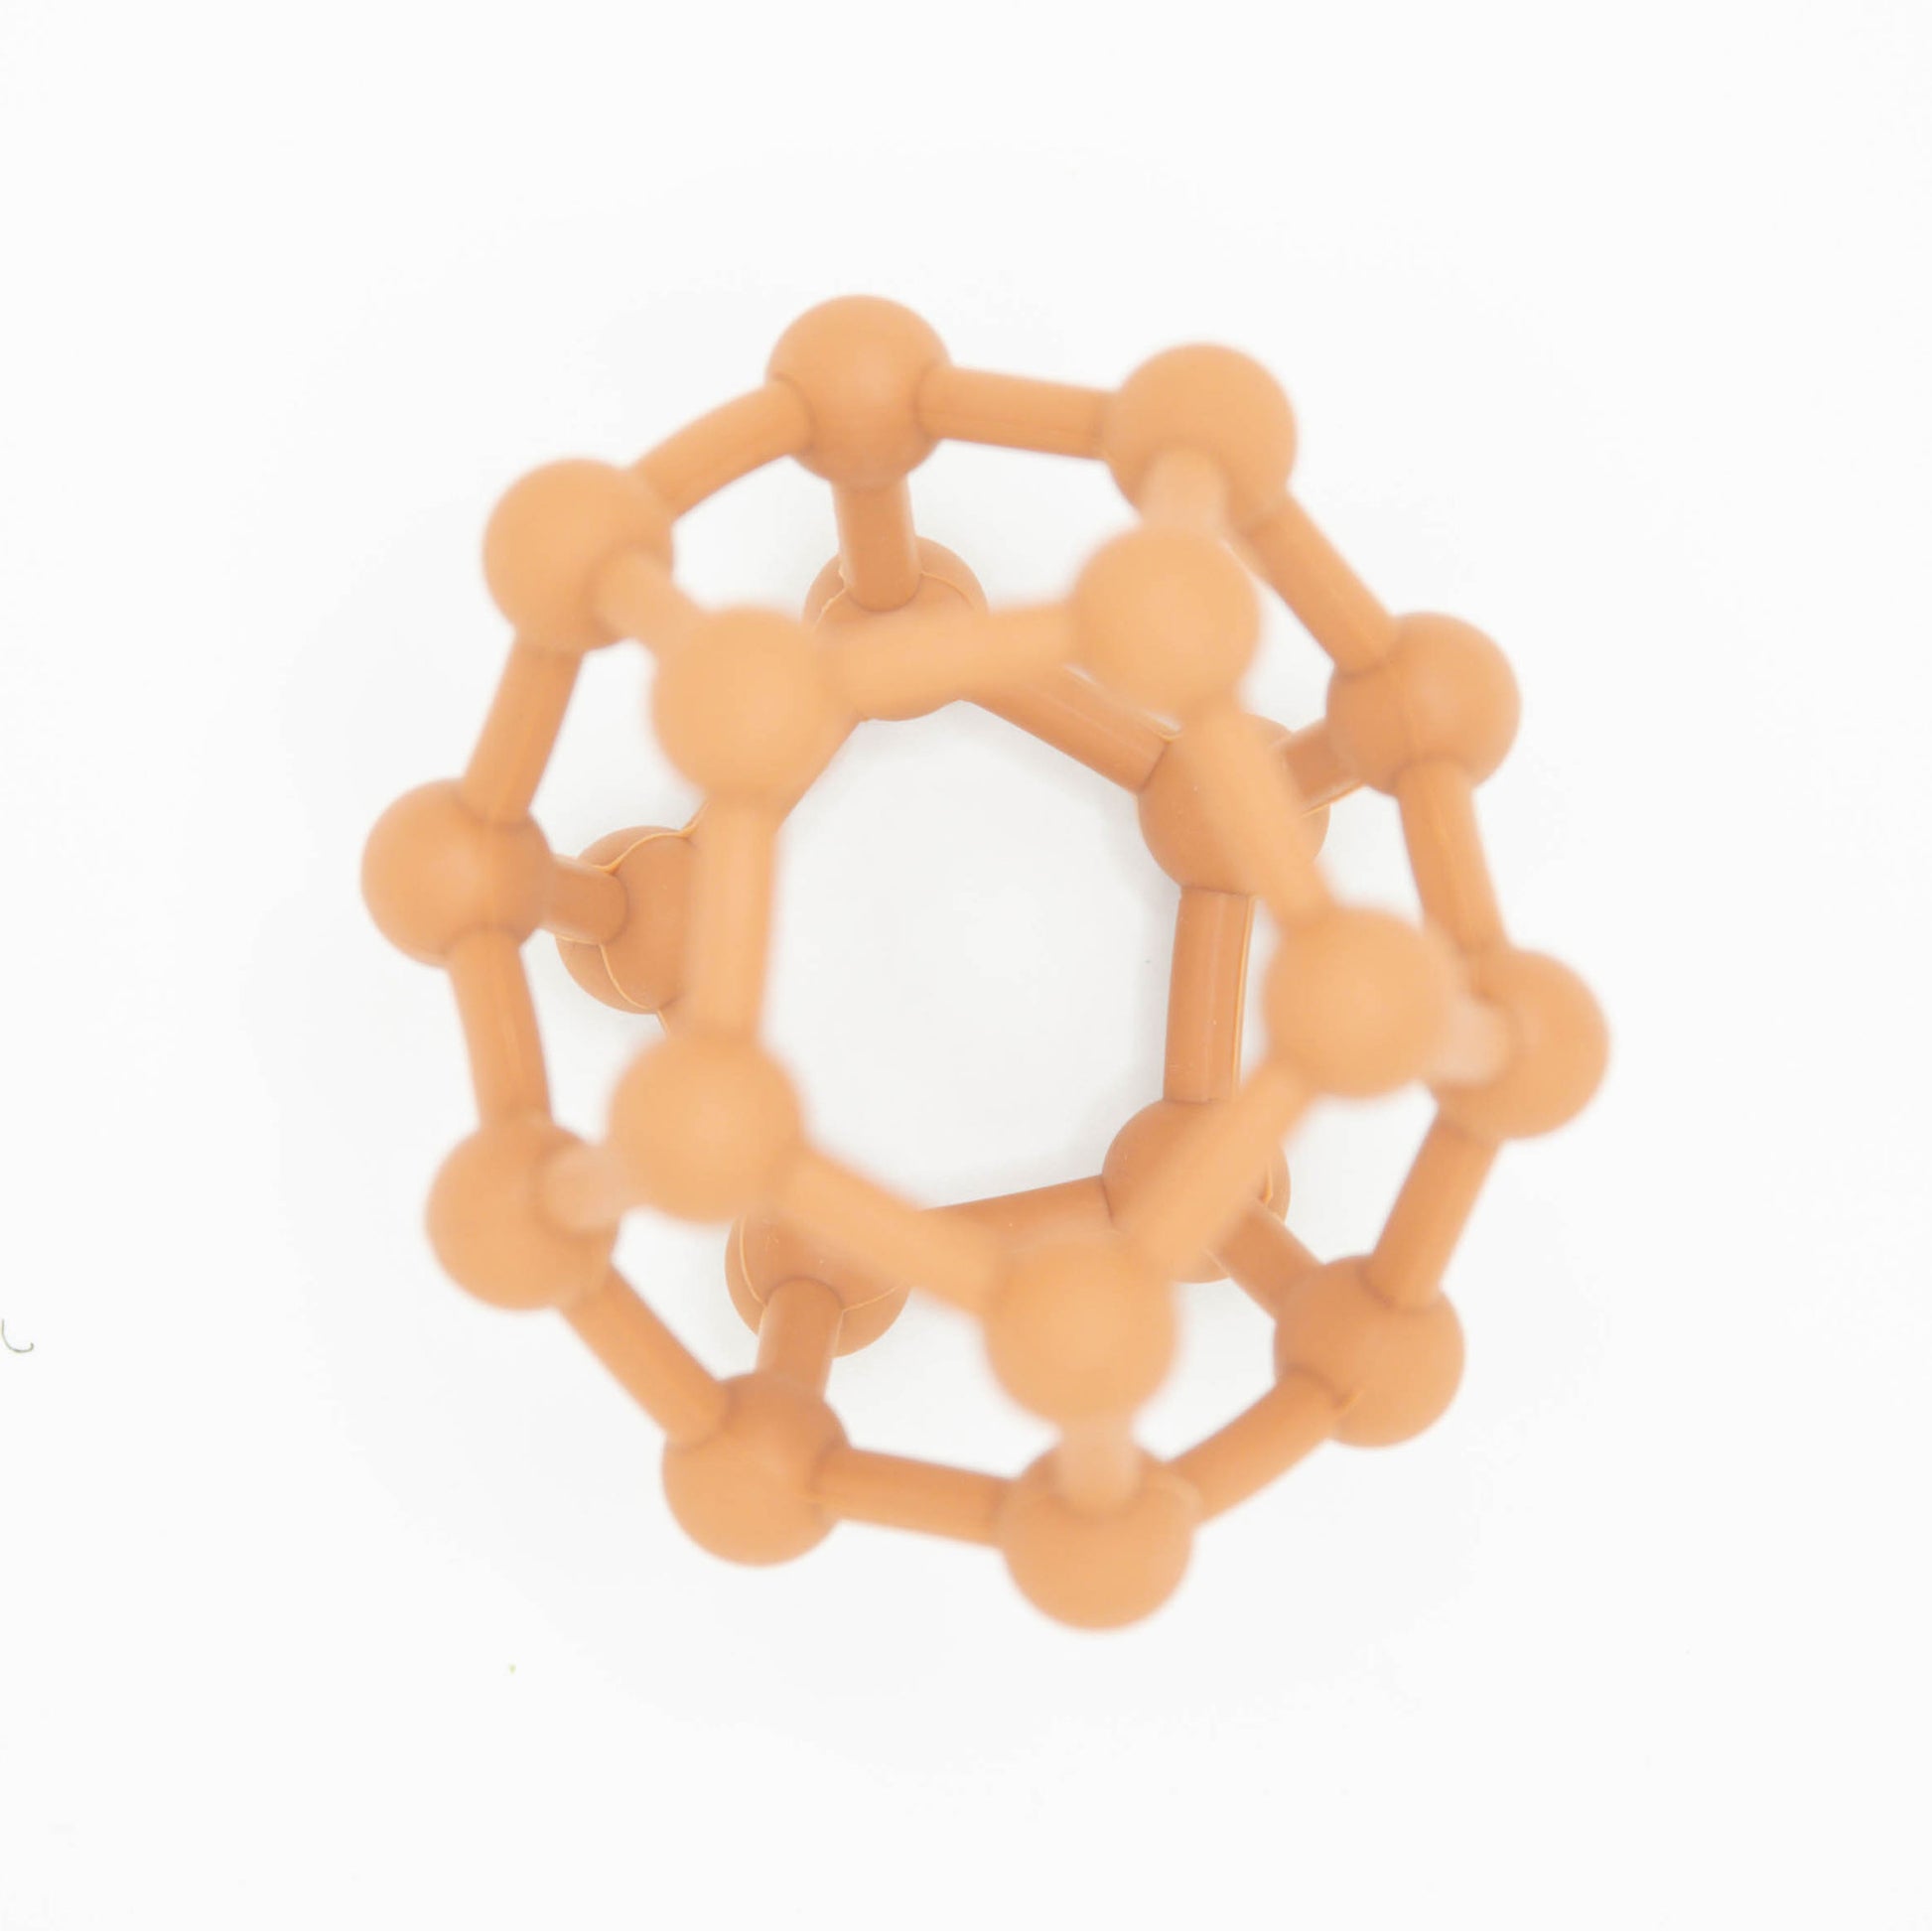 The Baby Cubby Geometric Beaded Silicone Teething Ball - Taupe